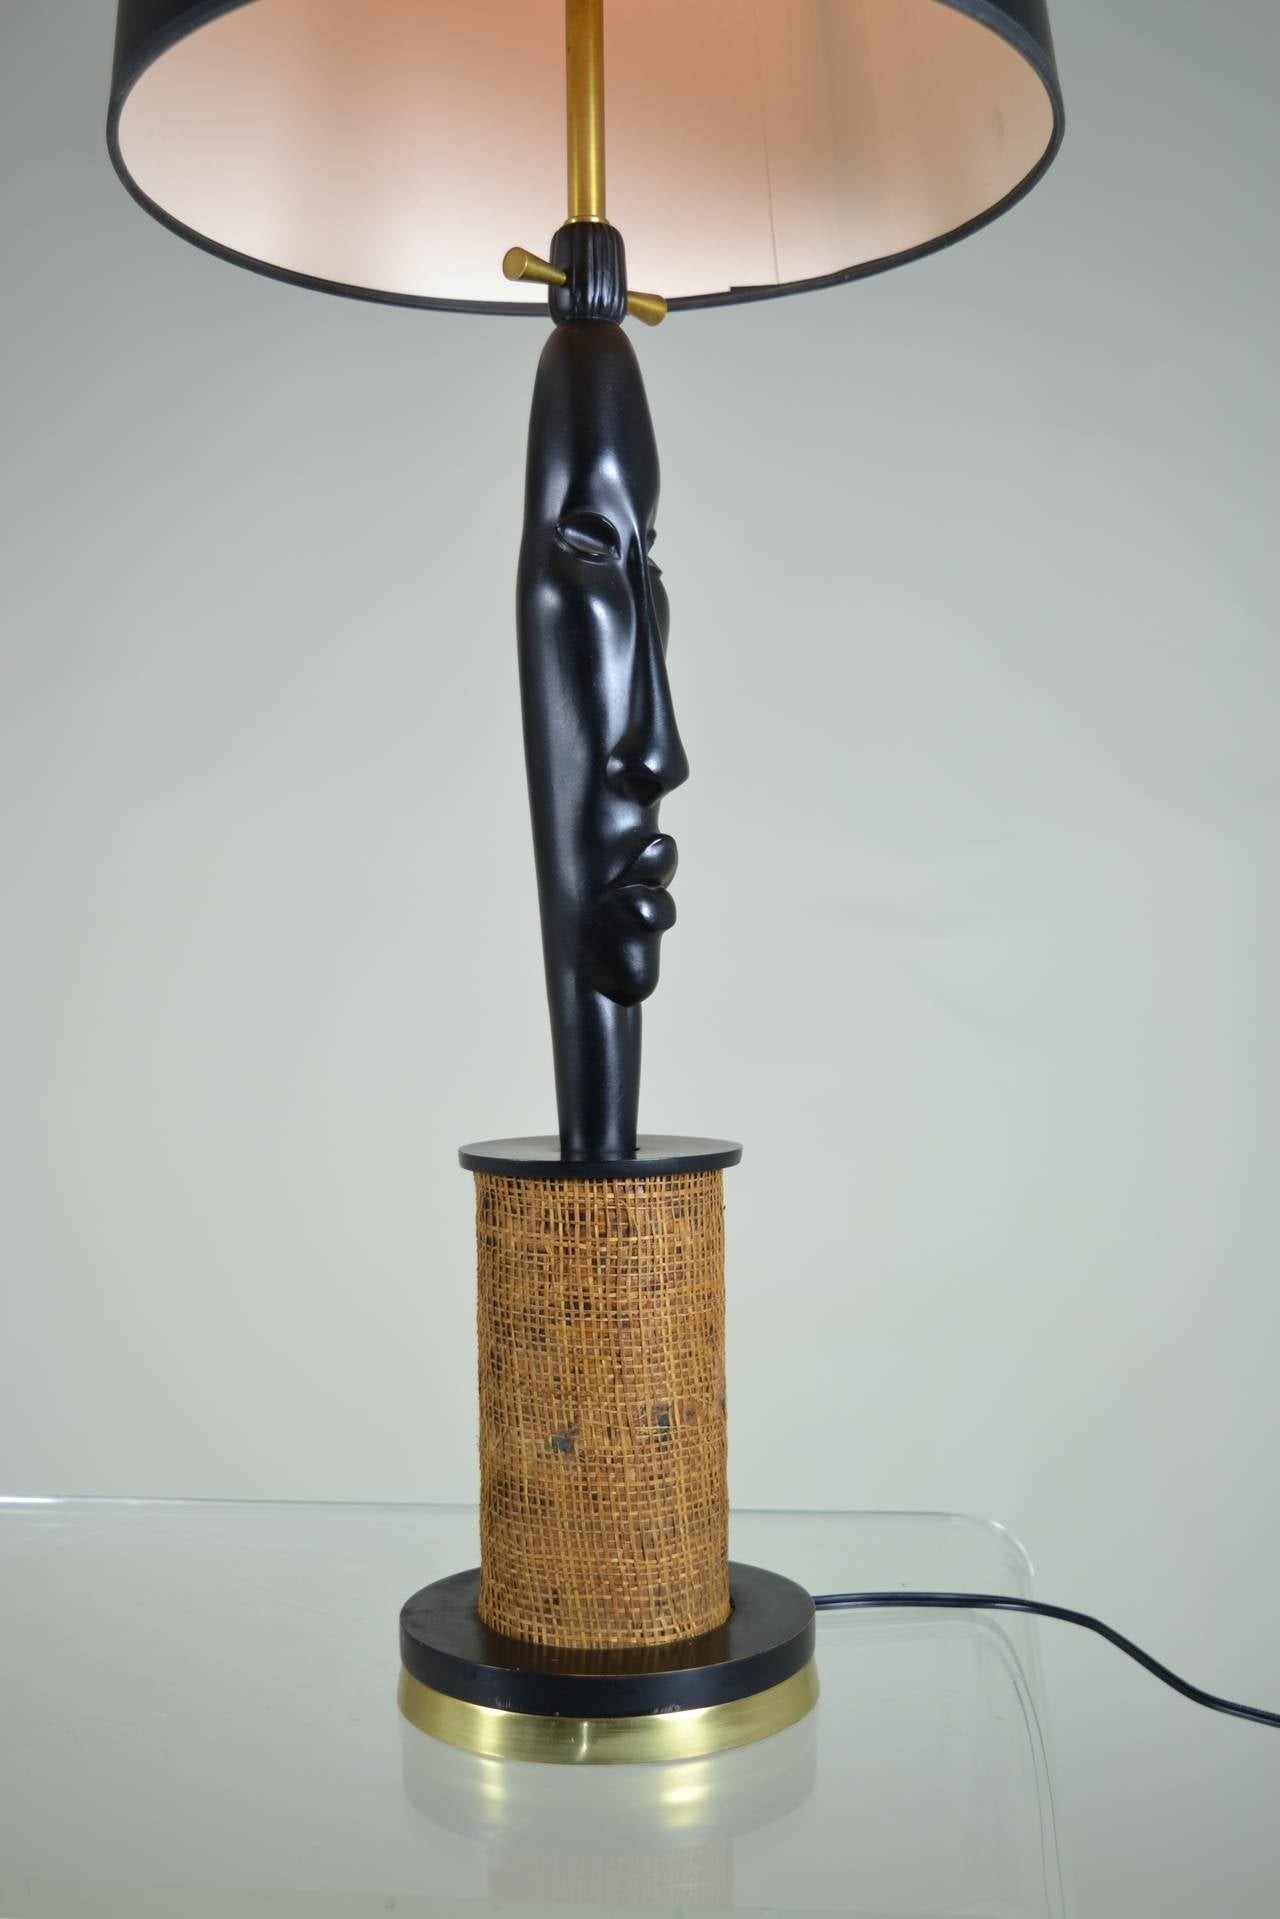 African style modern lamp circa 1950s for sale at 1stdibs